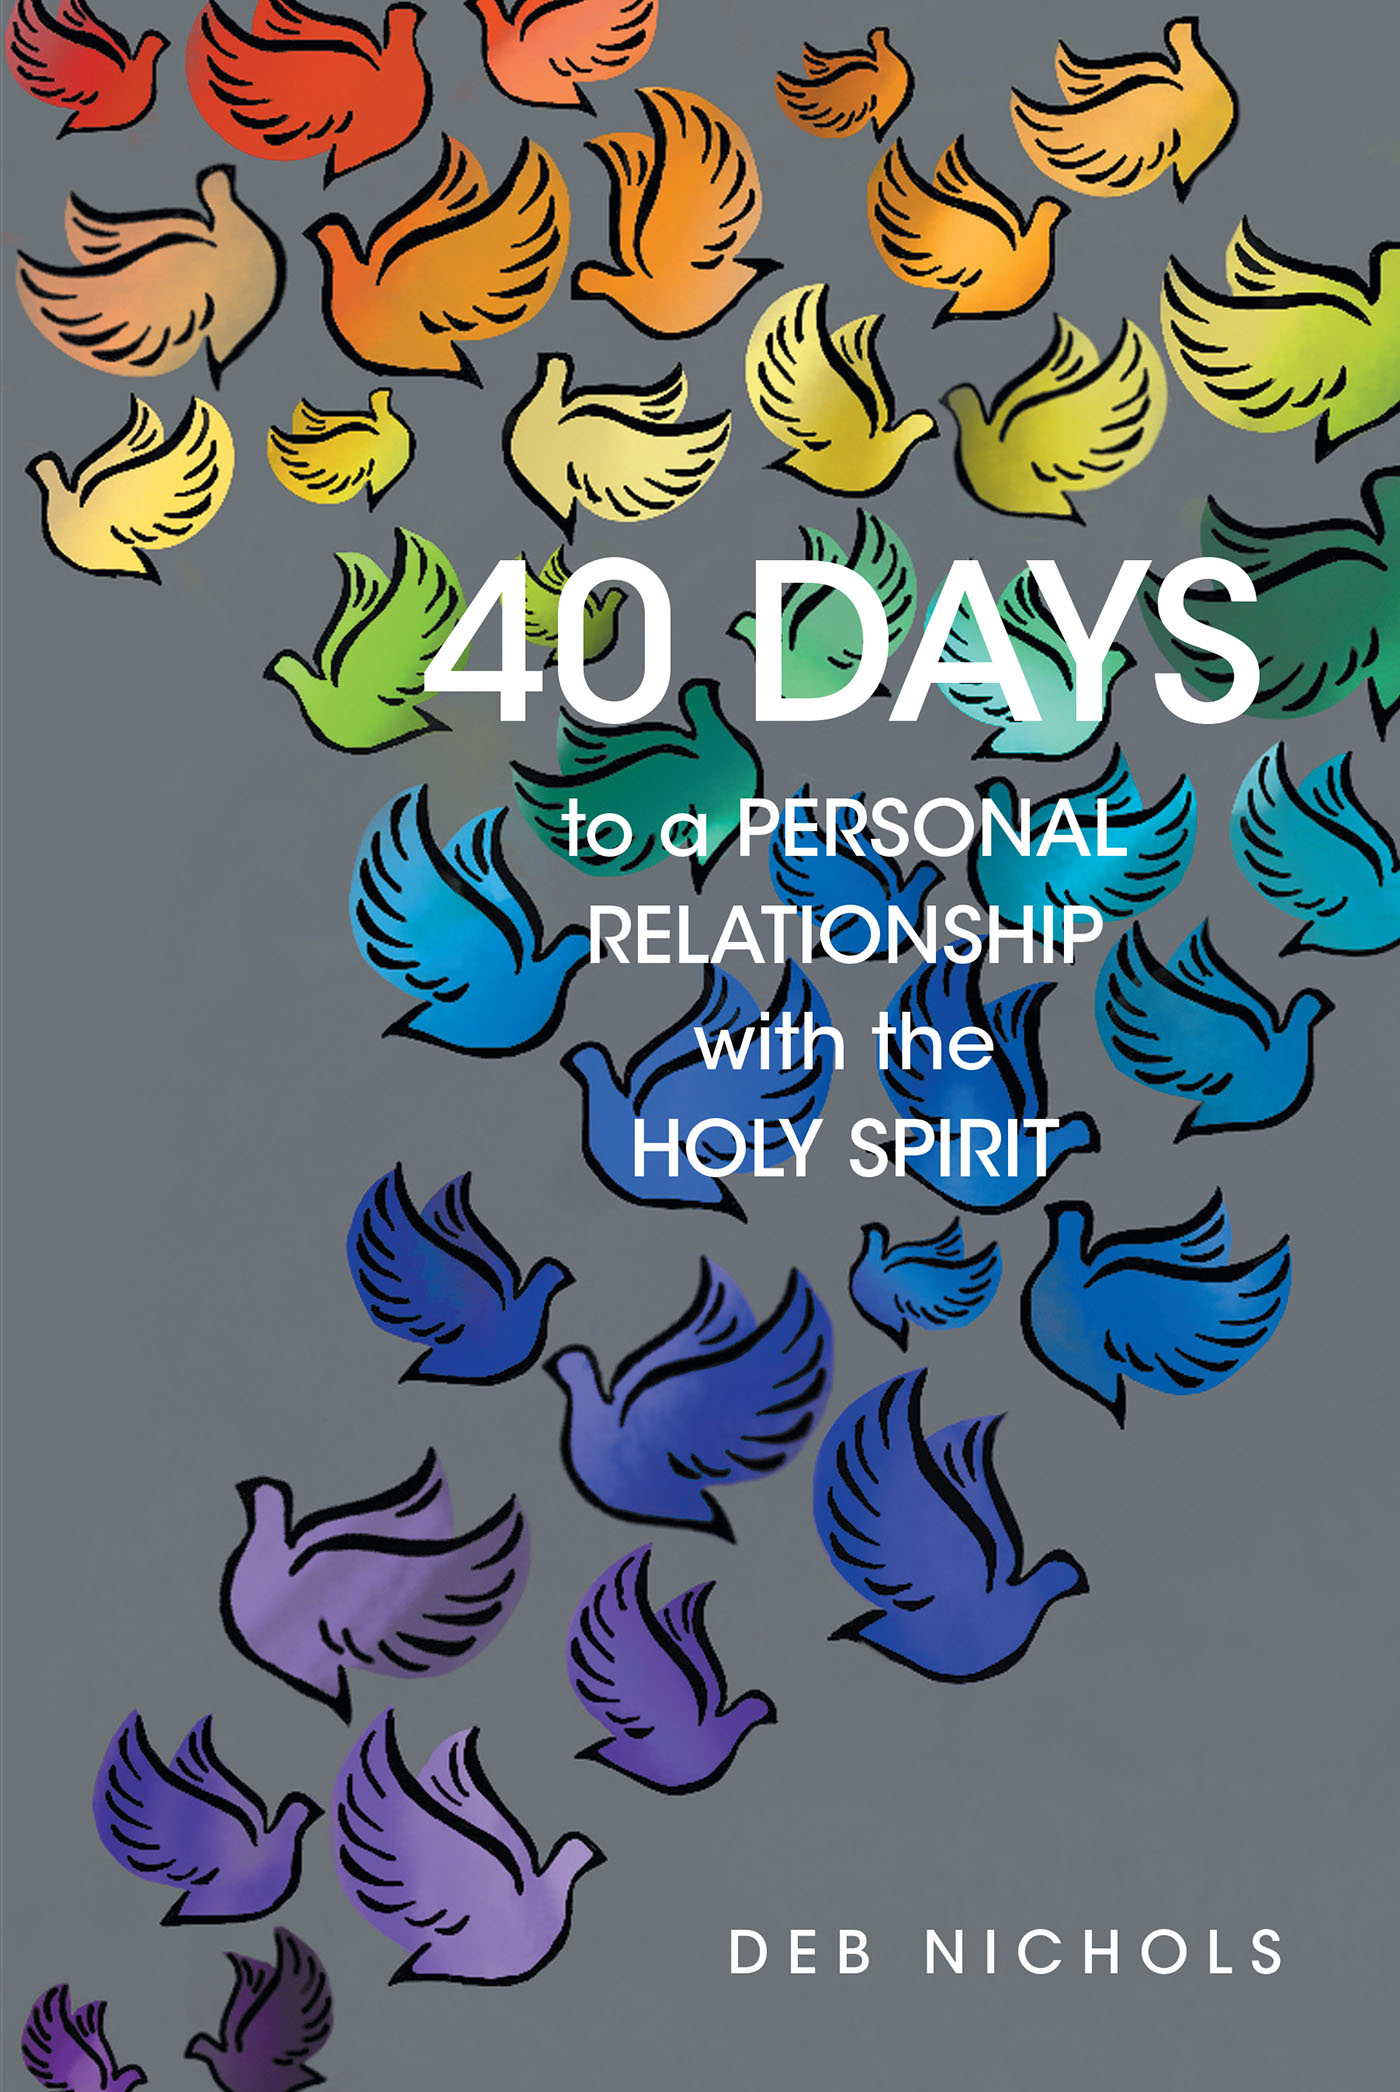 Deb Nichols’s Newly Released “40 DAYS to a PERSONAL RELATIONSHIP with the HOLY SPIRIT” is a Helpful Study of the Book of Acts That Relates to Today’s Modern World